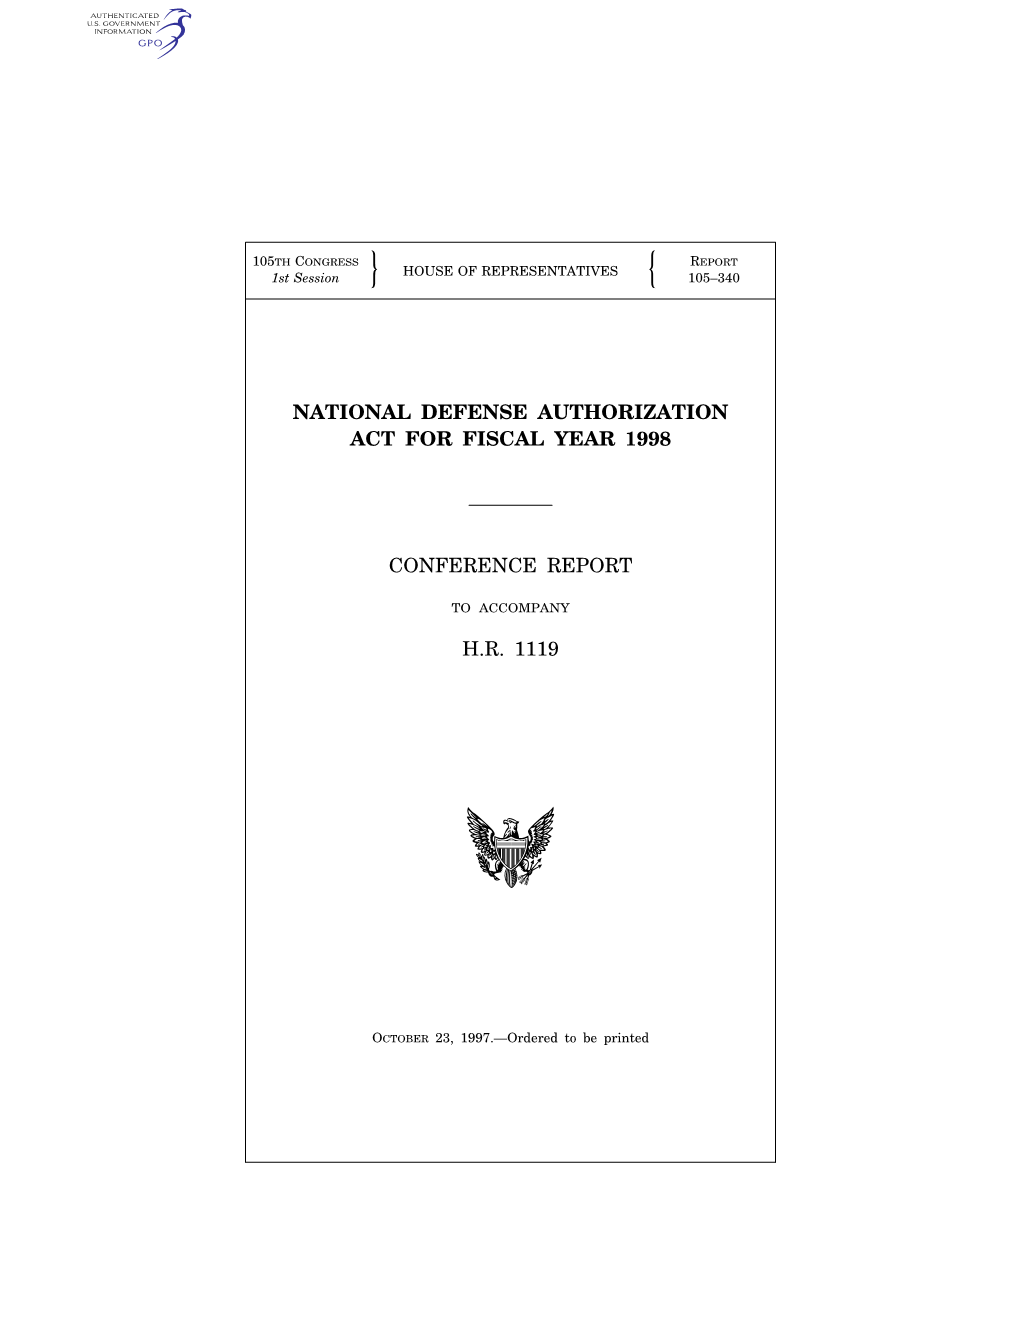 National Defense Authorization Act for Fiscal Year 1998 Conference Report H.R. 1119